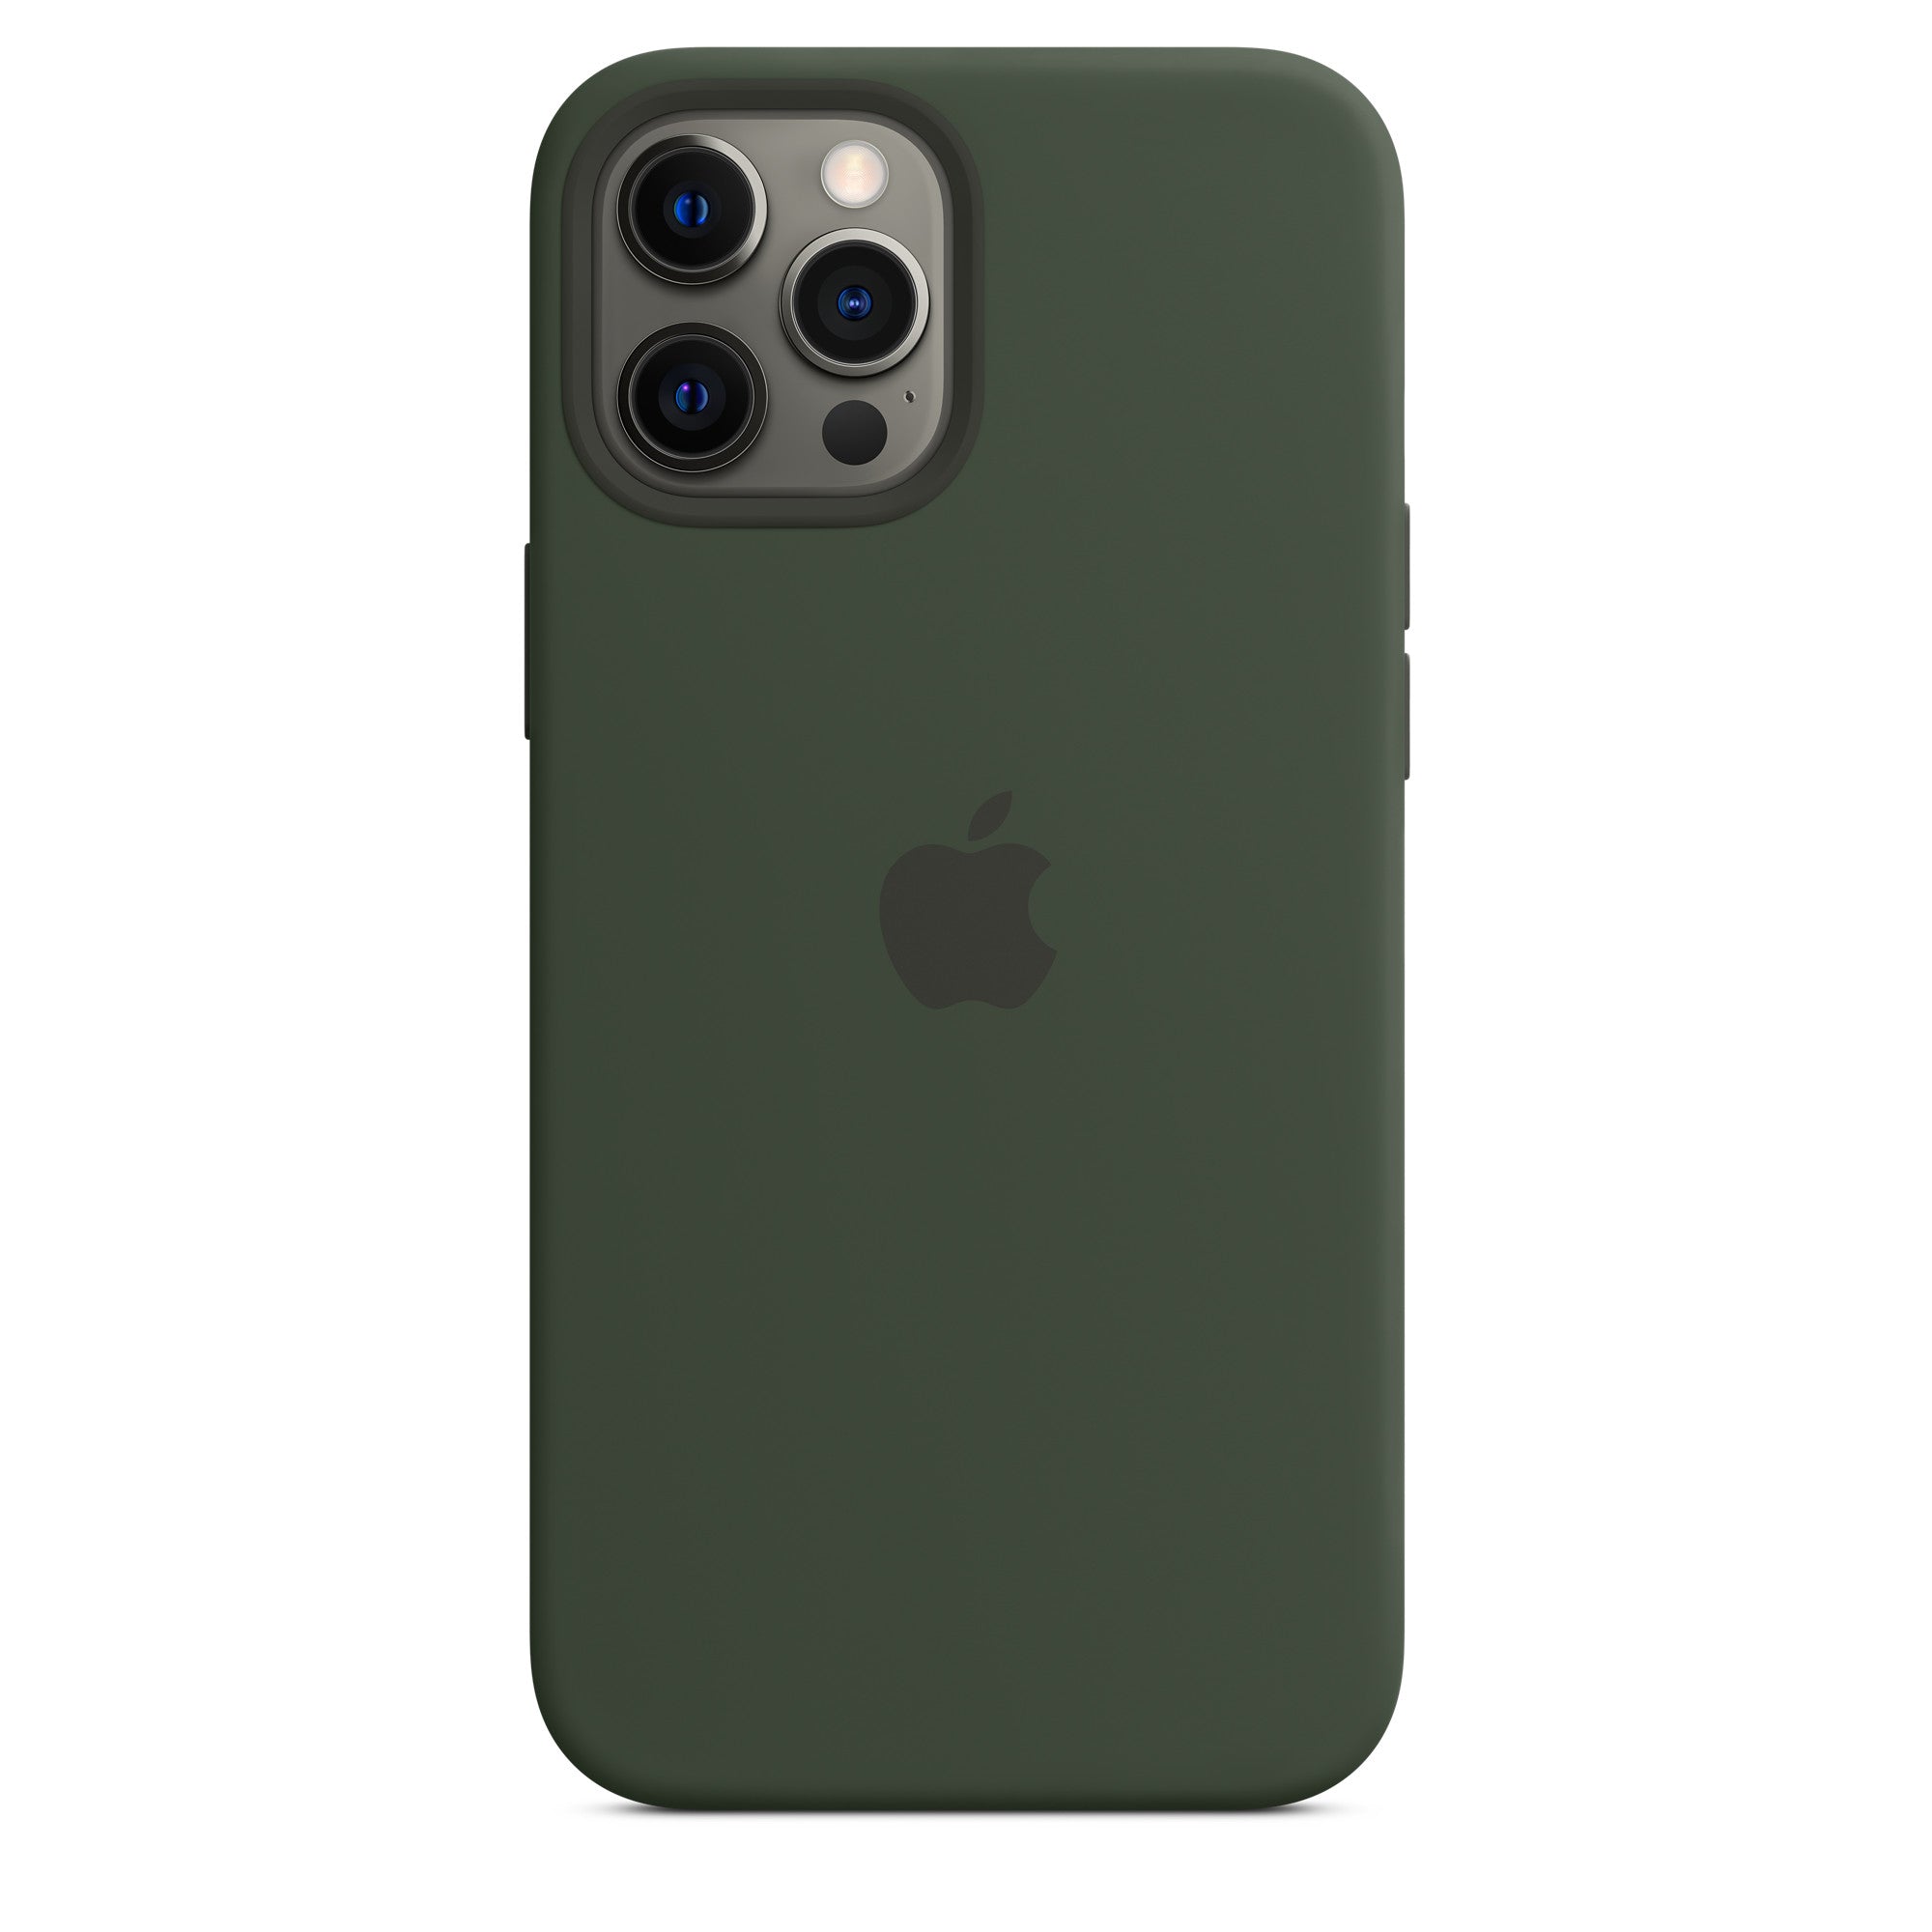 Apple iPhone 12 Pro Max Silicone Case with MagSafe - Cyprus Green Cyprus Green New - Sealed